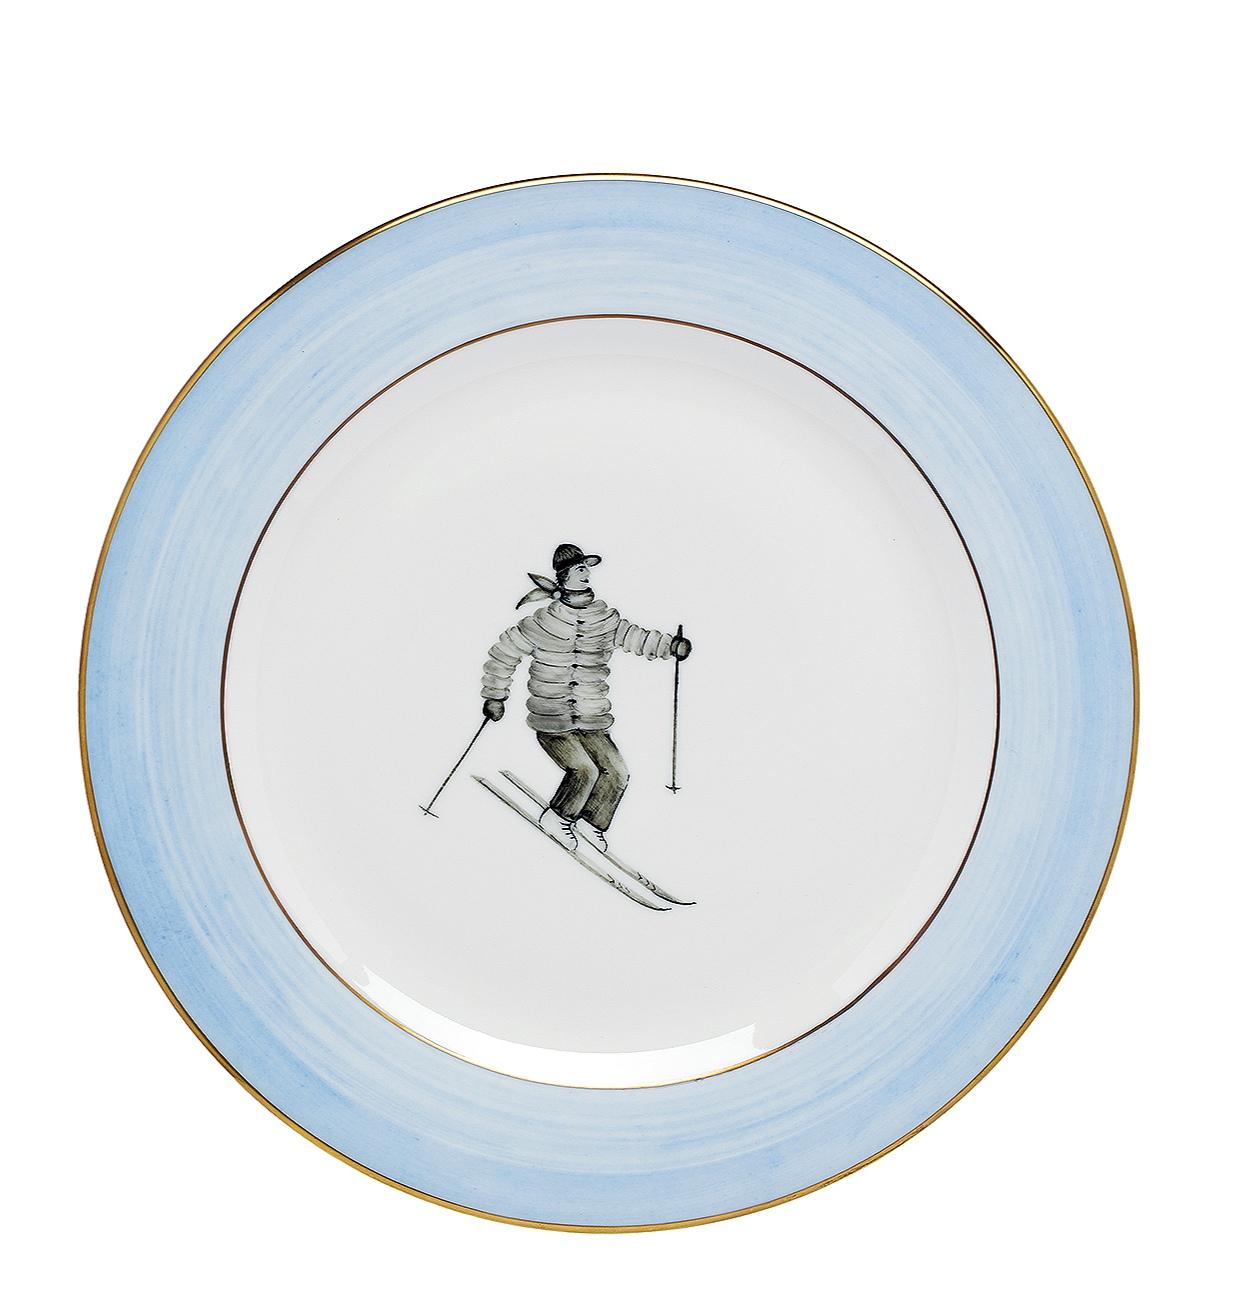 Set of six completely handmade and hand painted underglaze porcelain breakfast plates. The decor shows a Country style hands-free painted skier decor with a blue hands free line and platinum rimmed. A matching dinner plate and soup plate can be